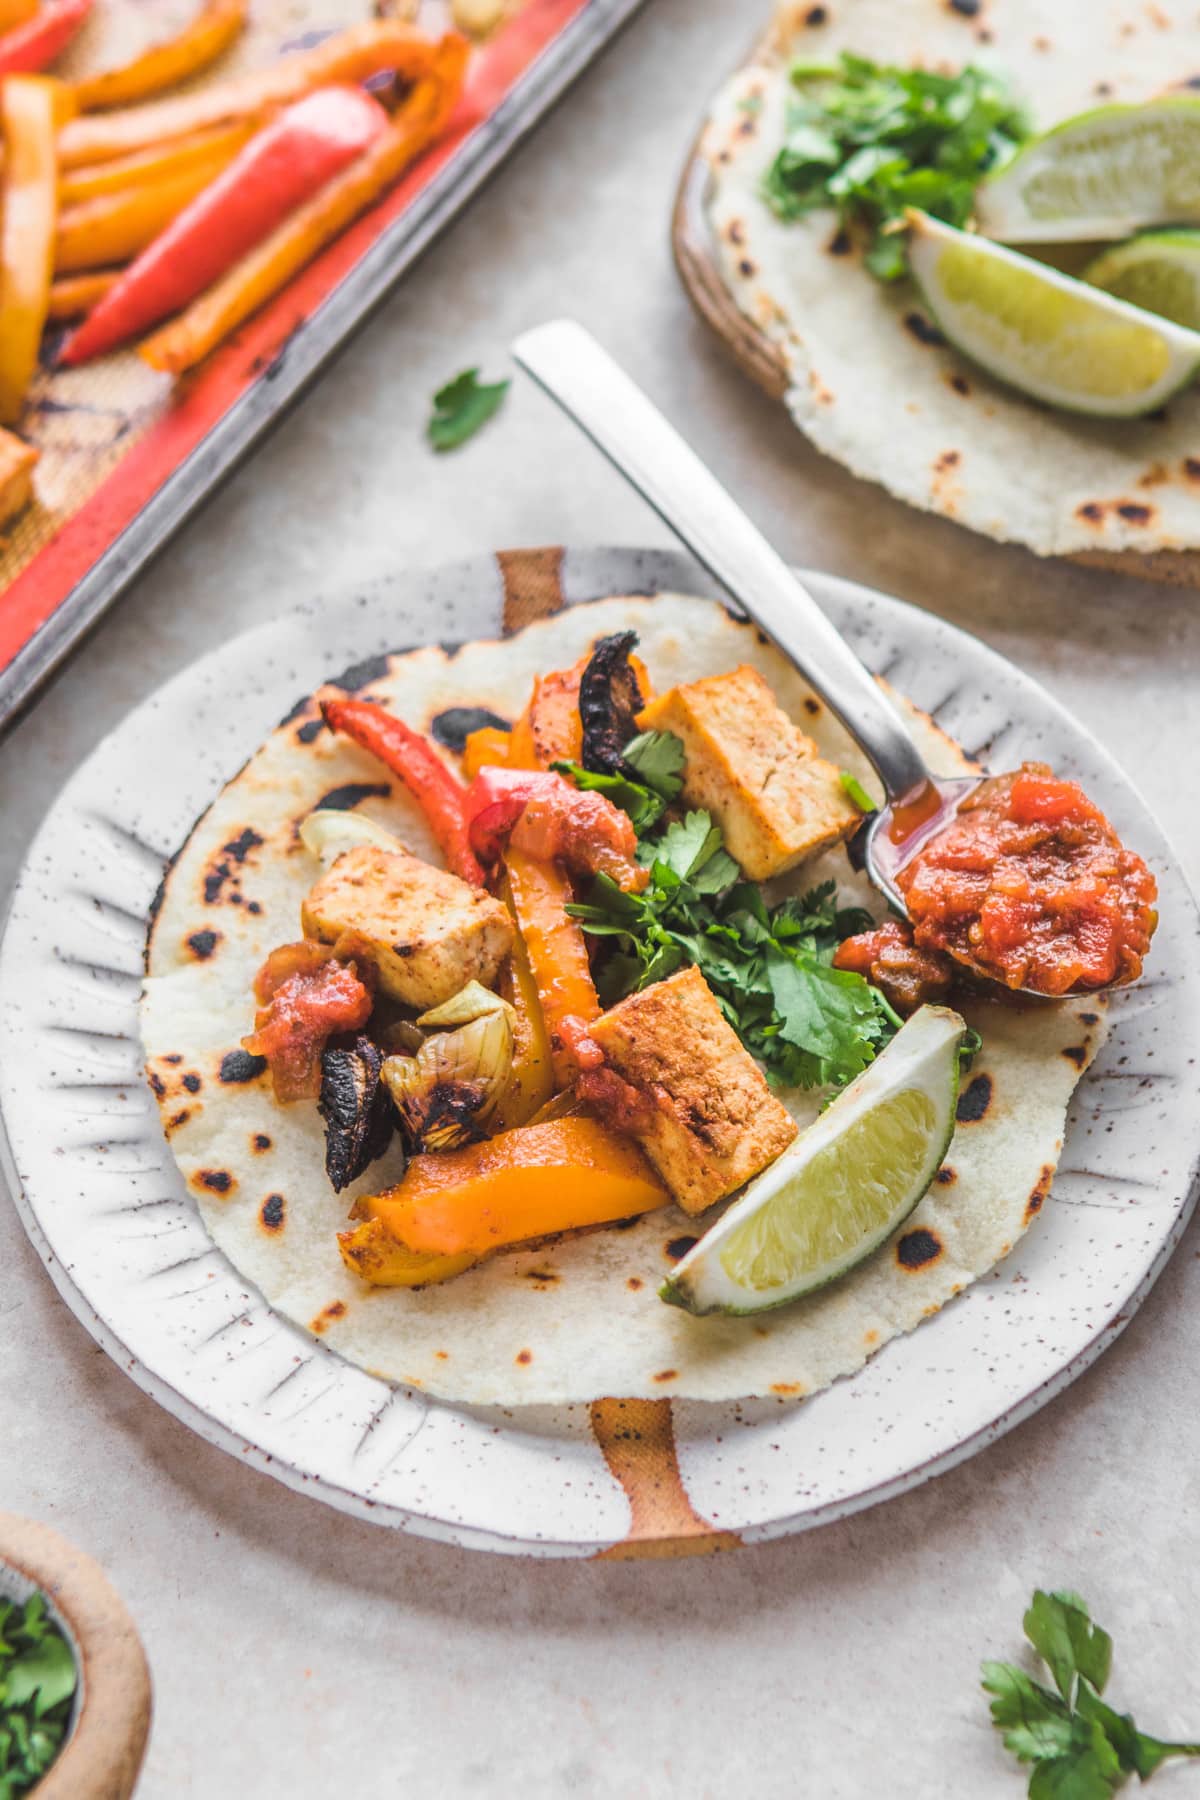 tortilla filled with tofu, roasted vegetables, and a lime wedge